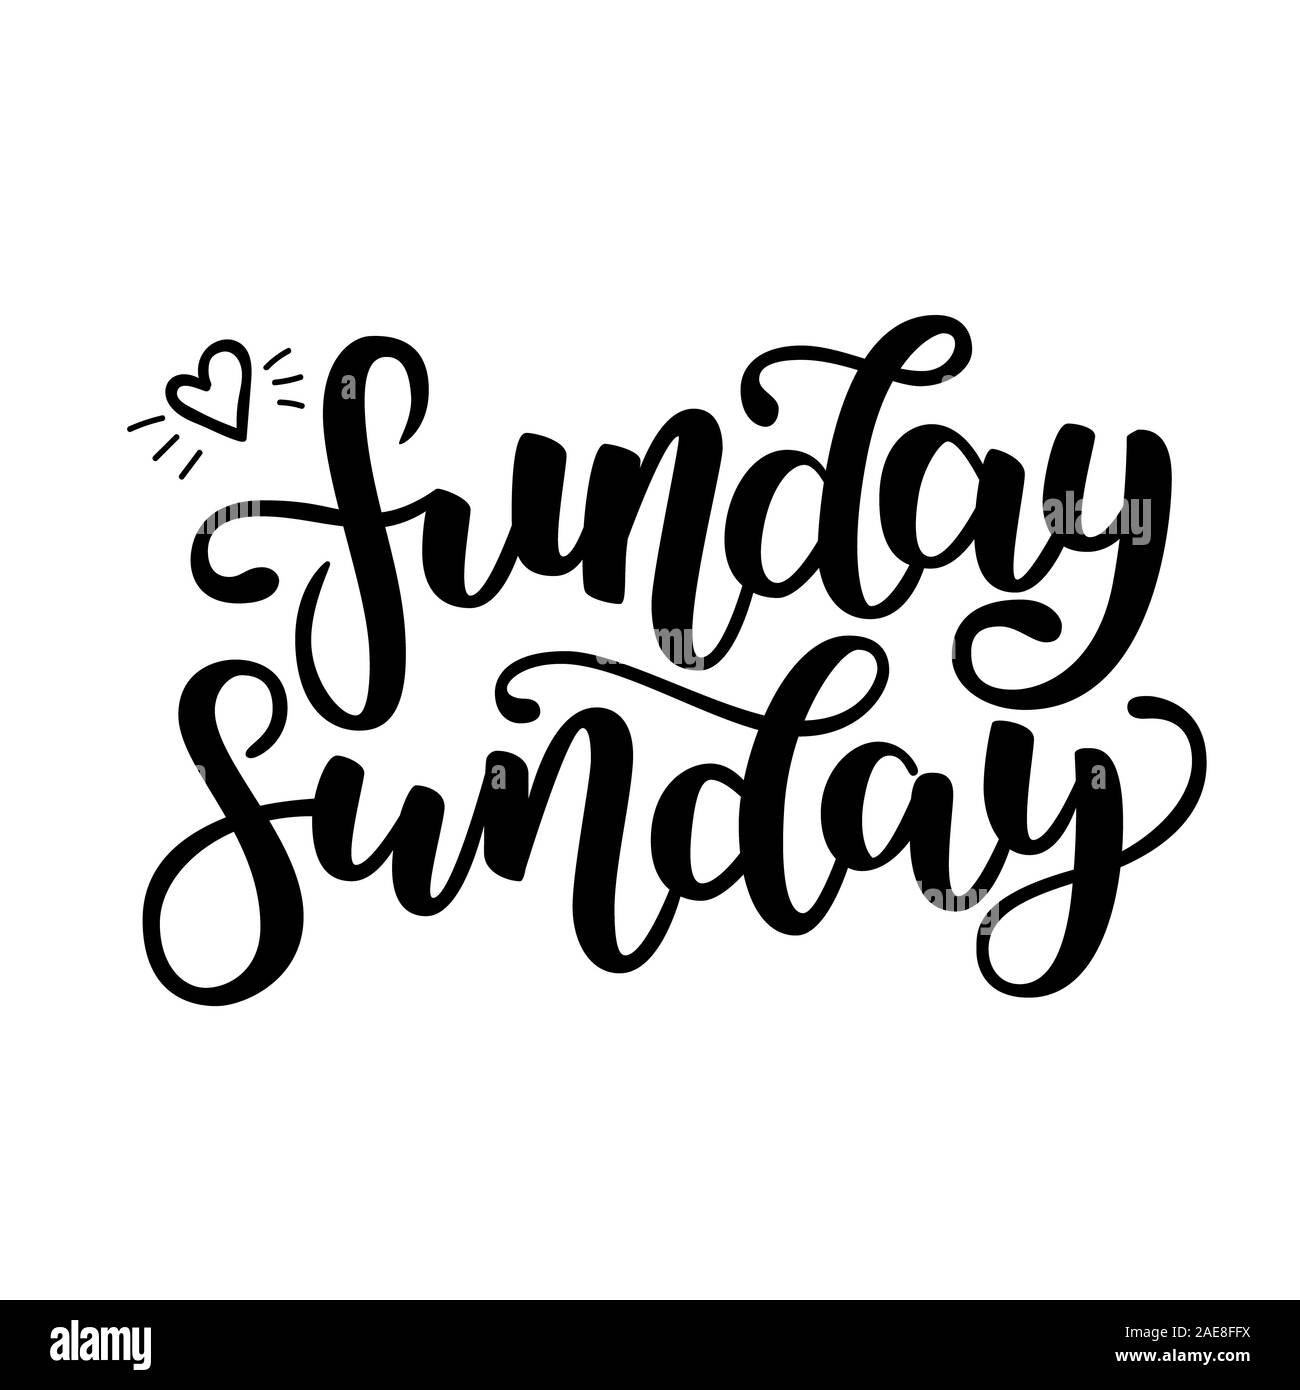 Funday Sunday. Hand drawn lettering. Typographic quote. Hand drawn lettering. Black hand drawn brush ink letters.  illustration isolated on white back Stock Photo